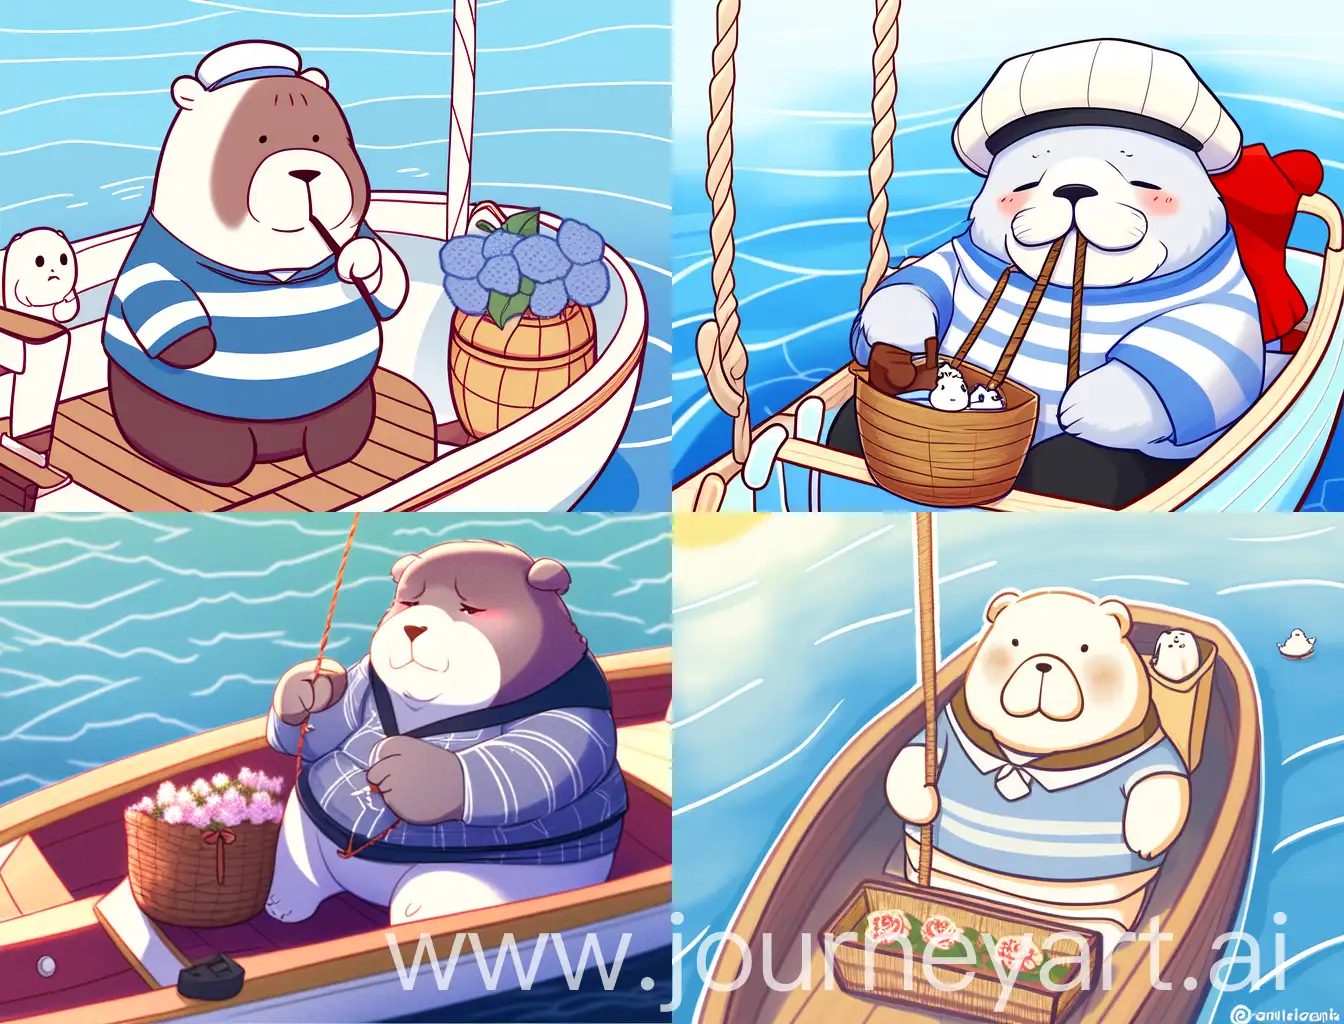 A cute walrus, sitting on a boat, knitting, wearing a white and blue striped shirt, smiling, cartoon, cute